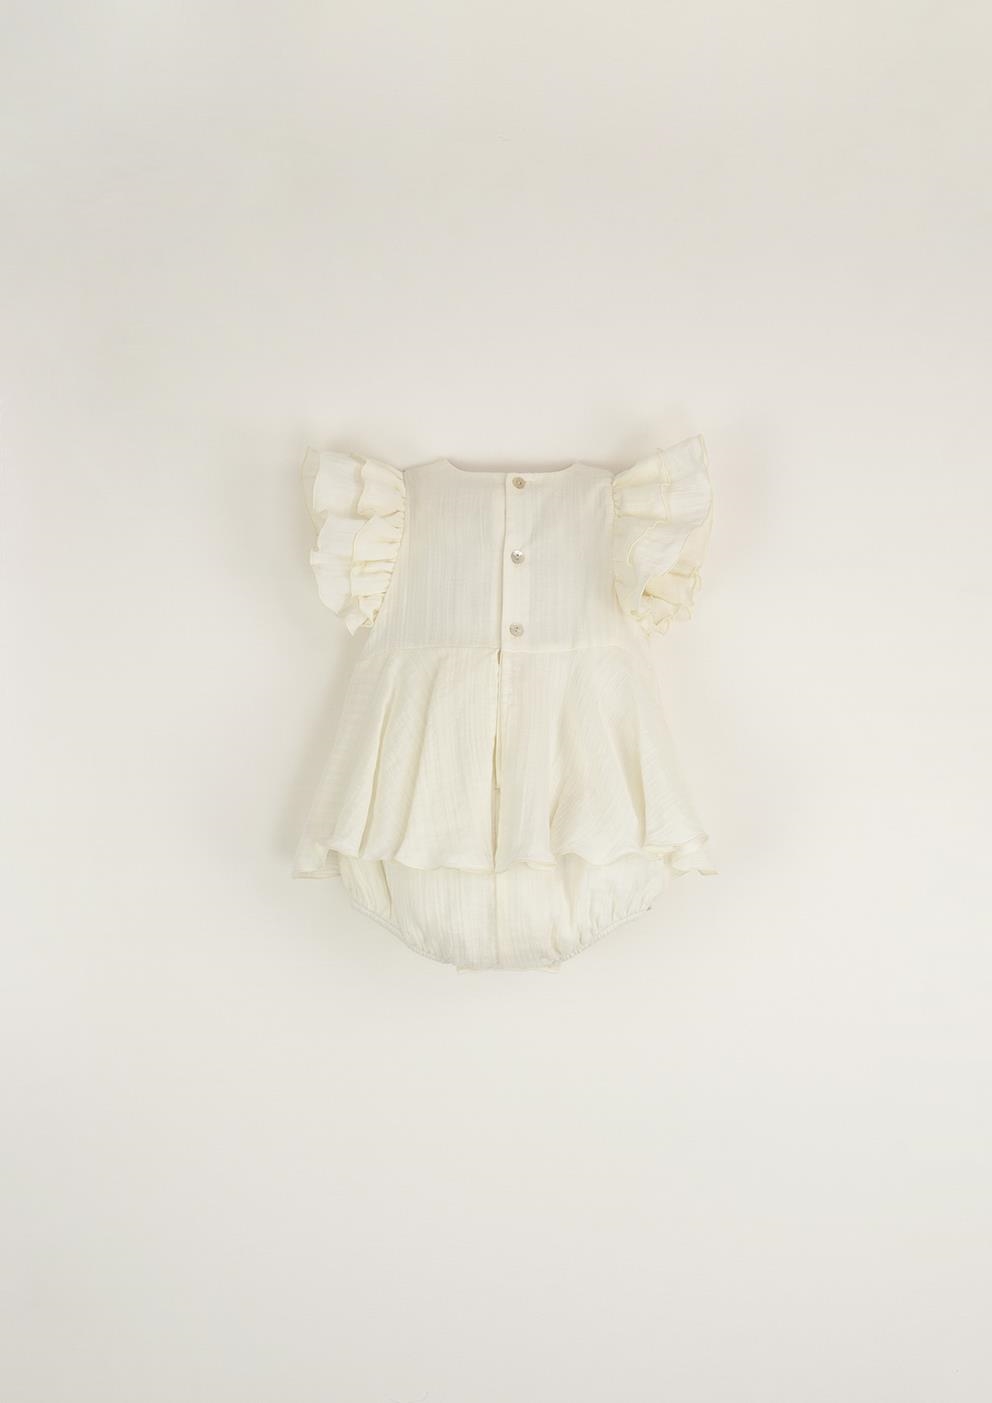 Mod.9.1 Organic off-white romper suit with cape-style skirt | SS23 Mod.9.1 Organic off-white romper suit with cape-style skirt